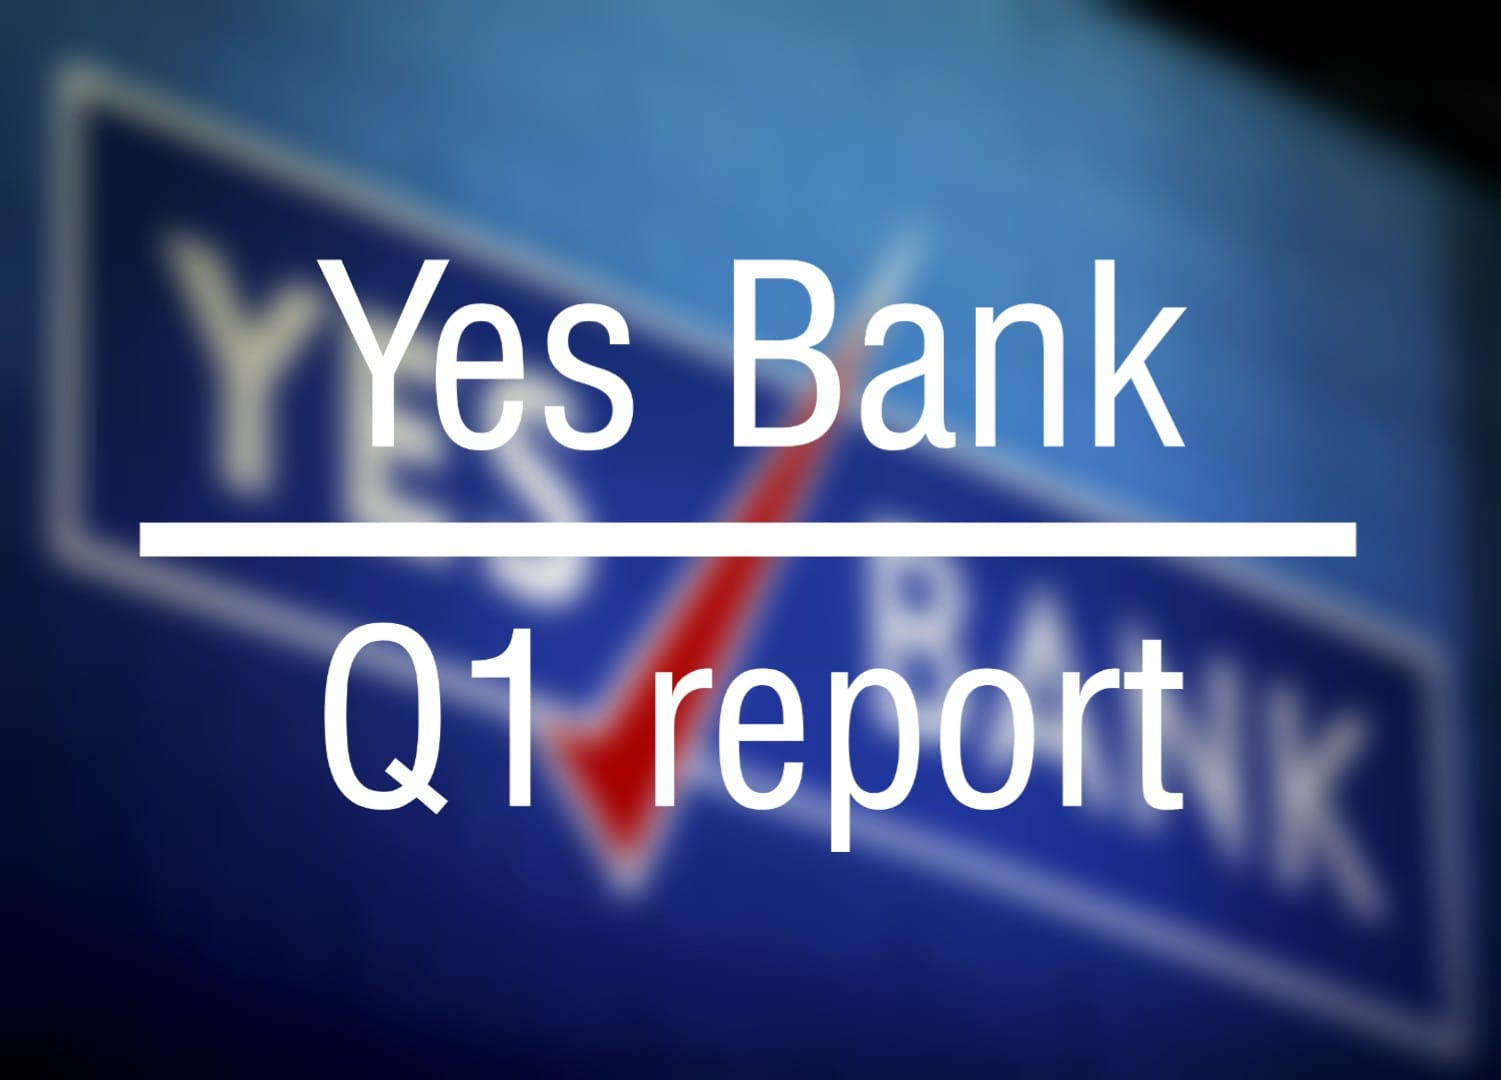 Yes Bank Q1 report